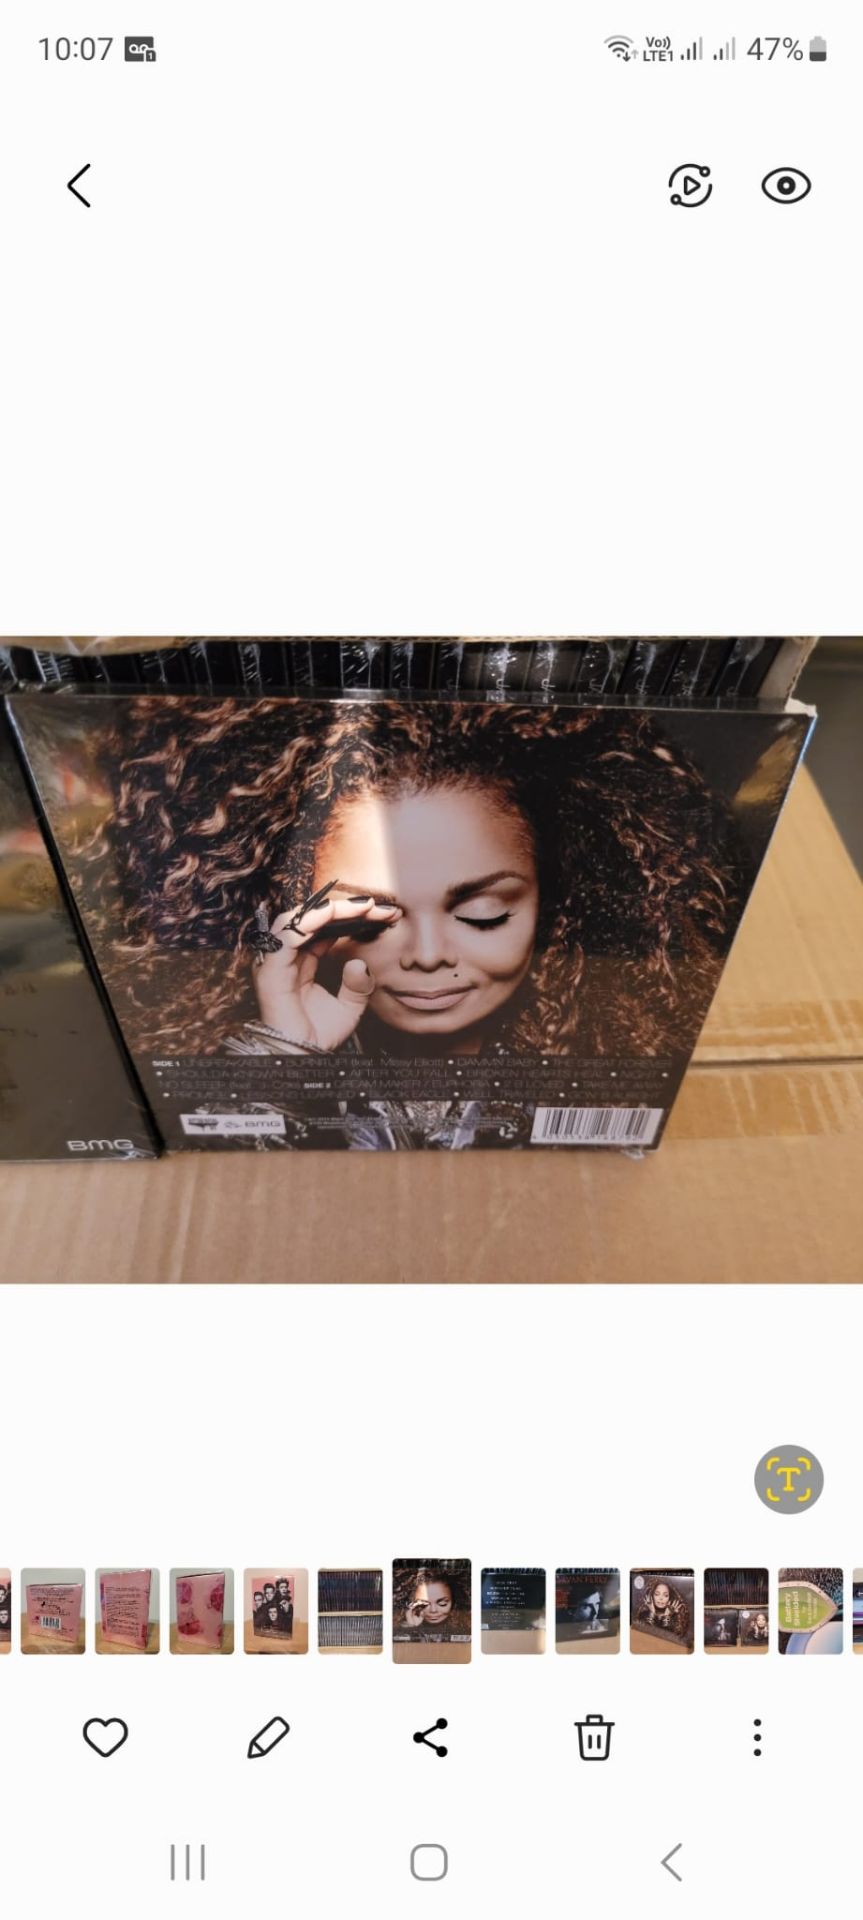 CD Janet Jackson and Brain Ferry x 6000 - Image 10 of 10